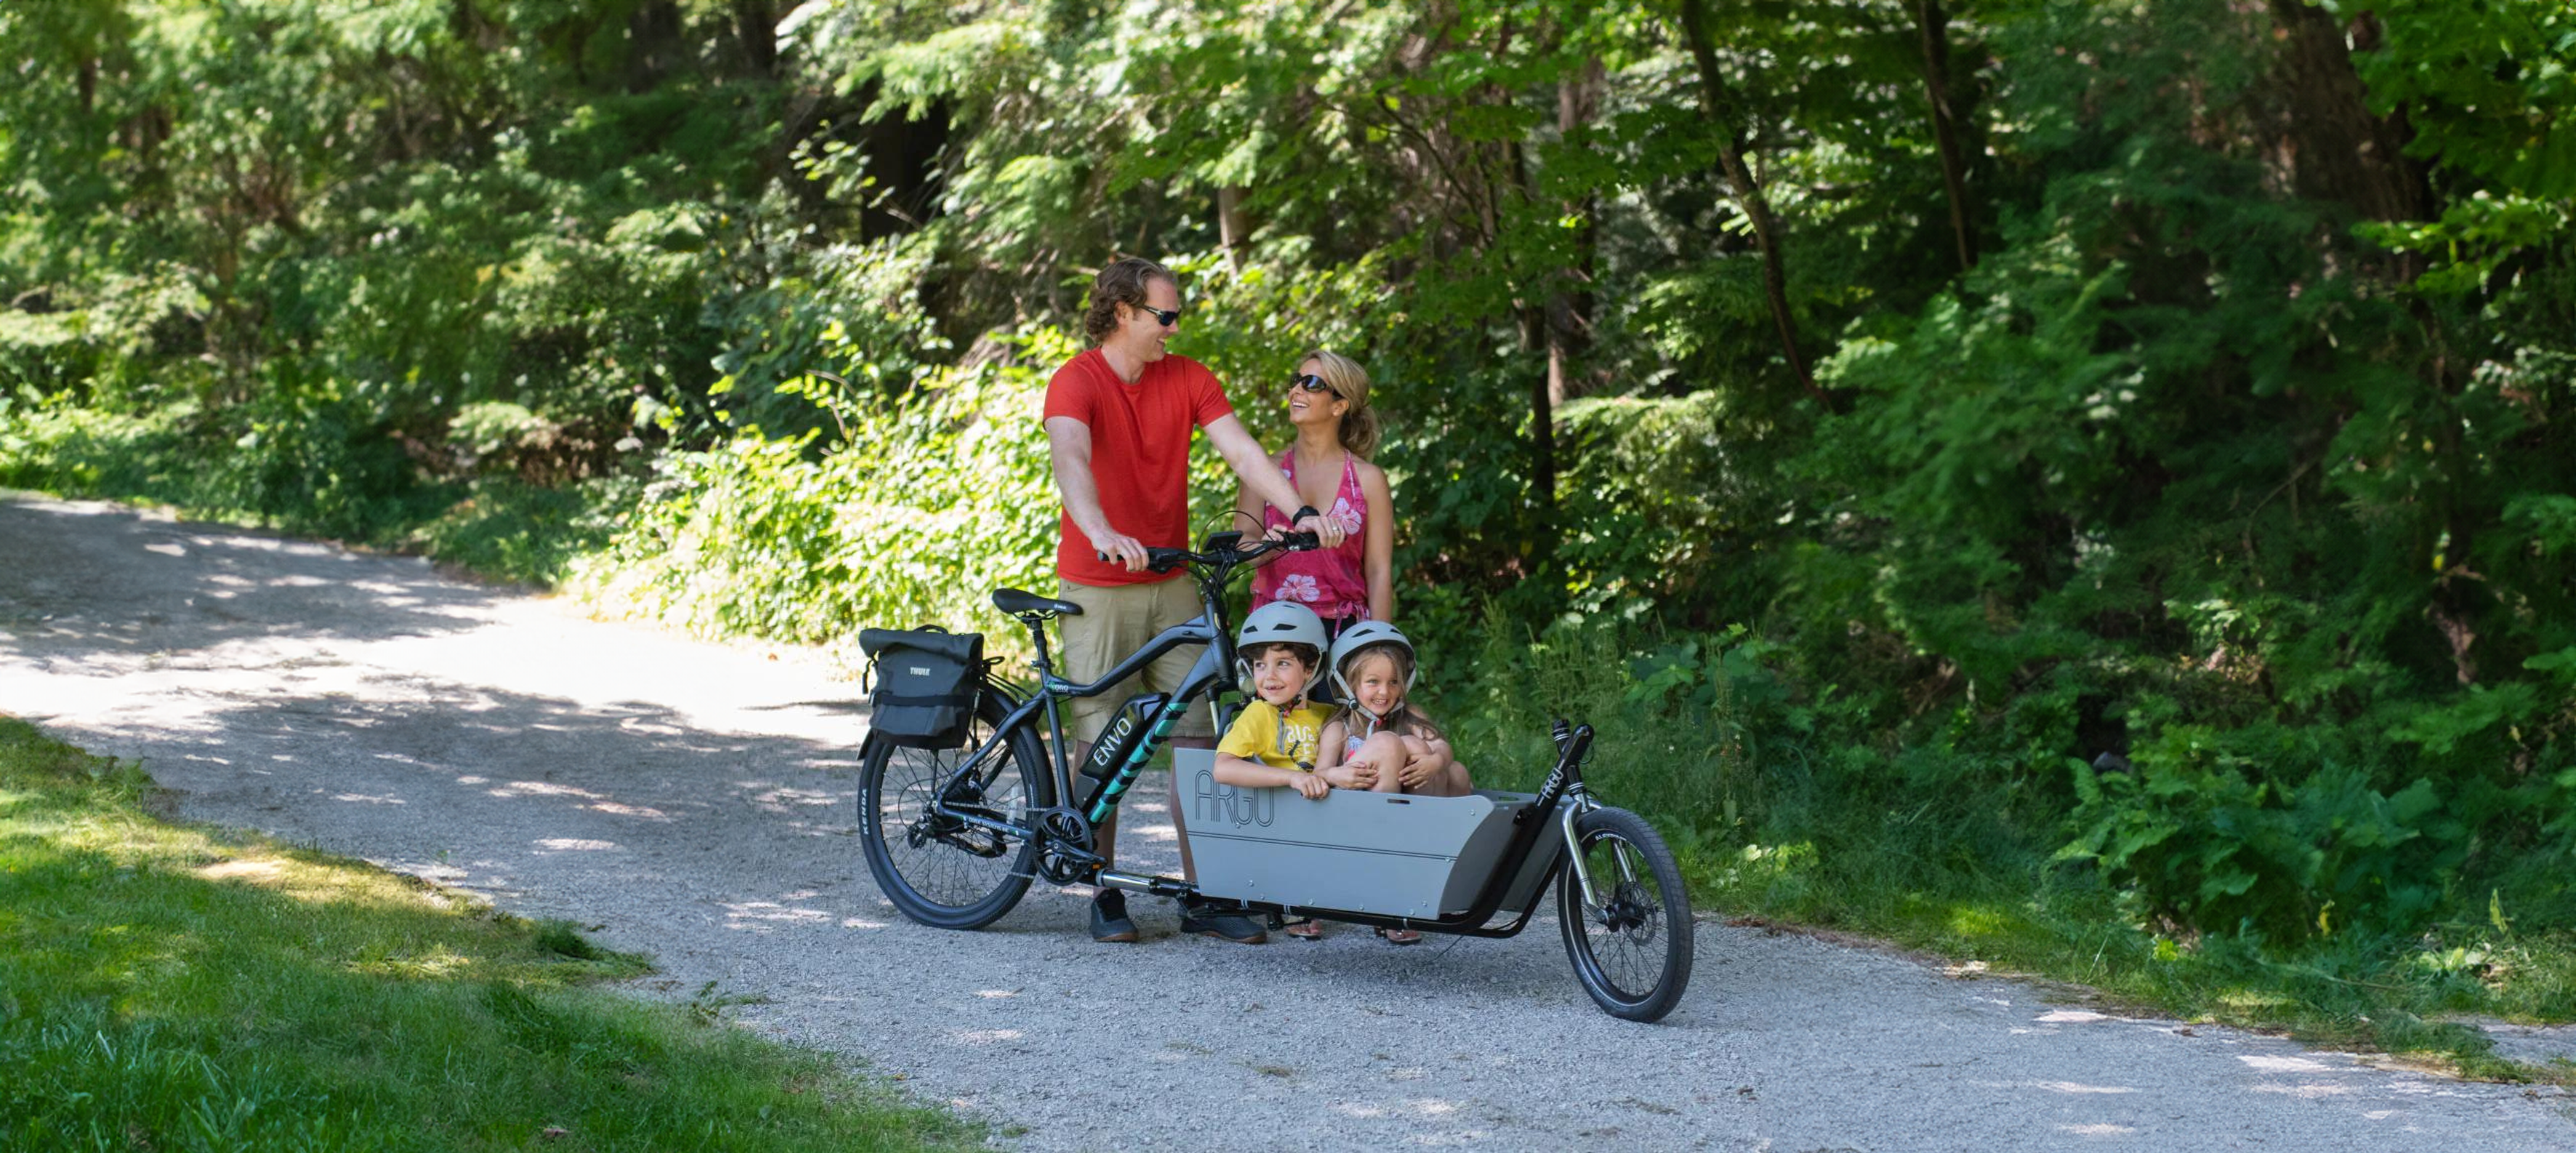 Transport Children or Cargo with an Easy Add-On Bike Kit